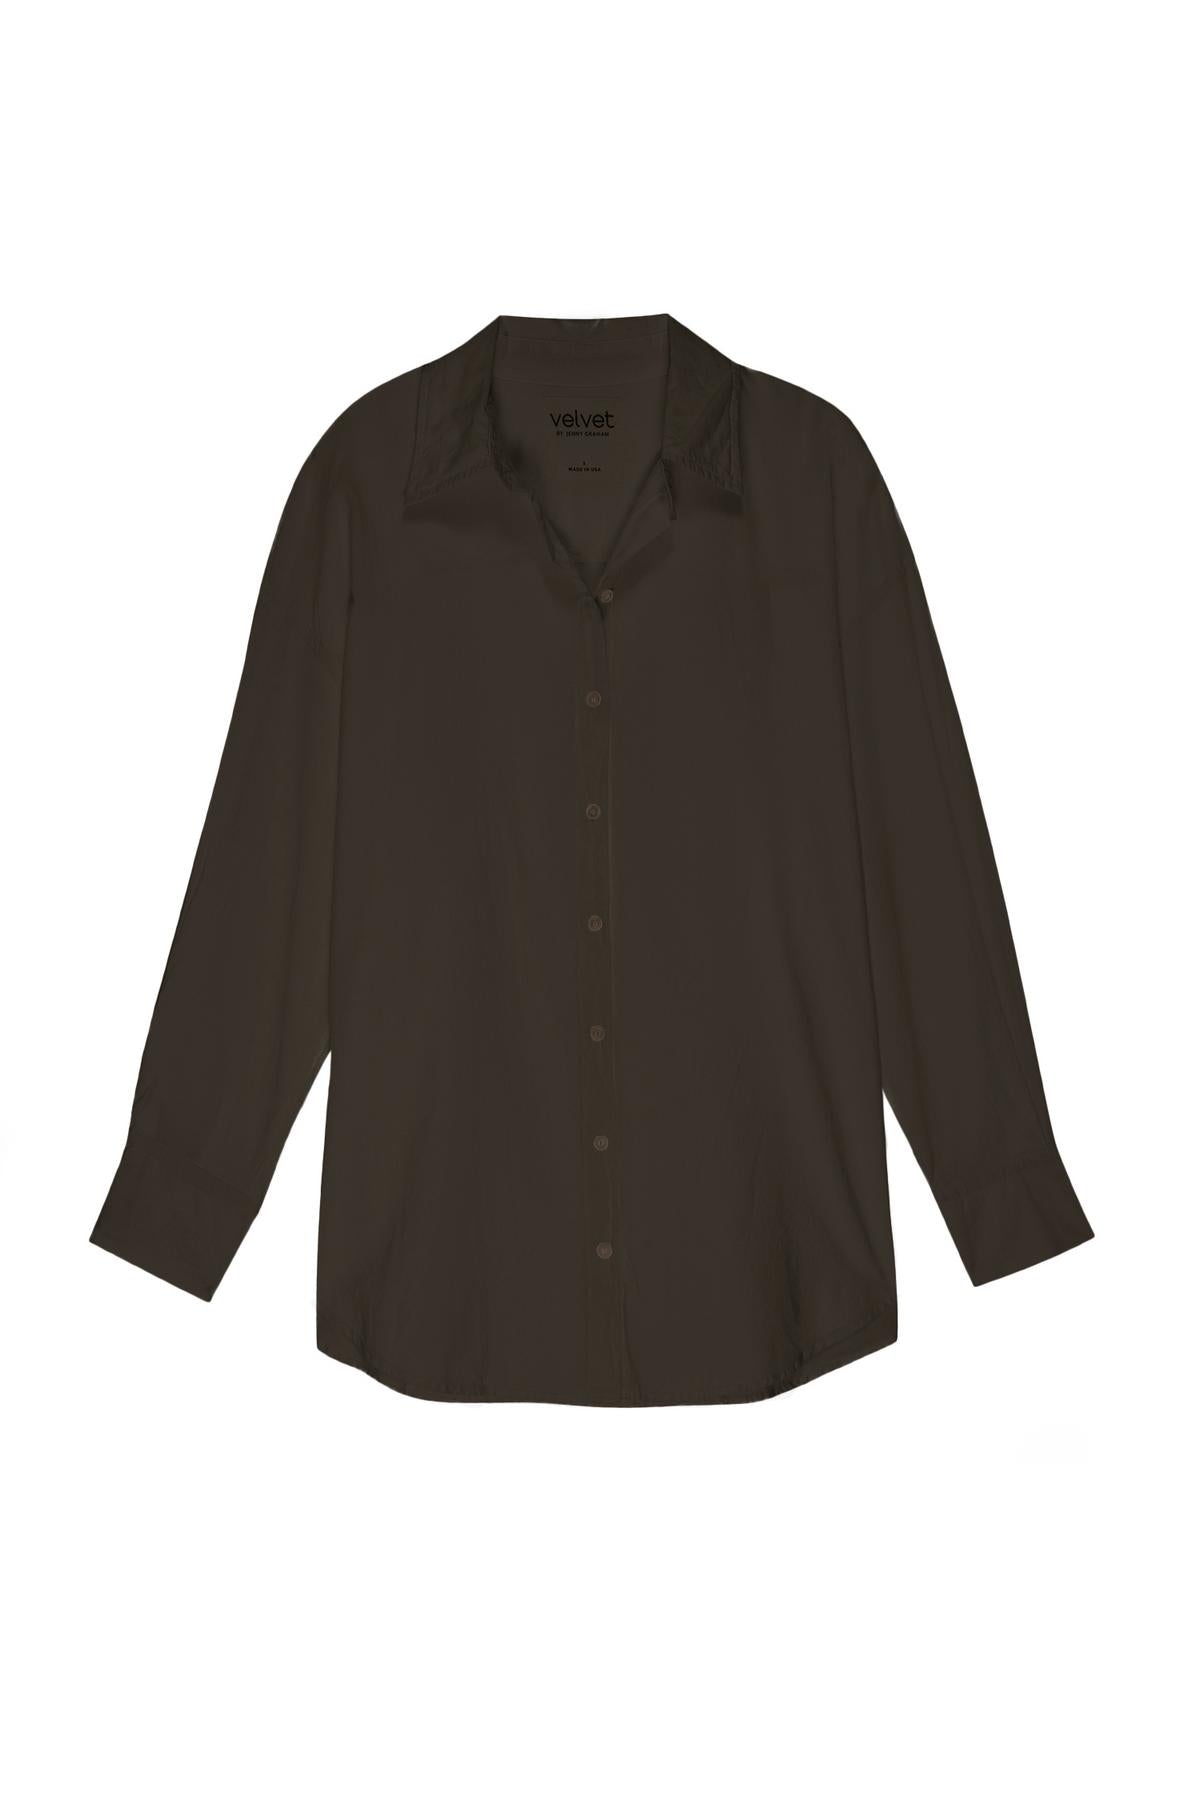 A soft cotton shirting women's oversized brown Velvet by Jenny Graham REDONDO BUTTON-UP SHIRT with a borrowed-from-the-boys silhouette.-35783065796801